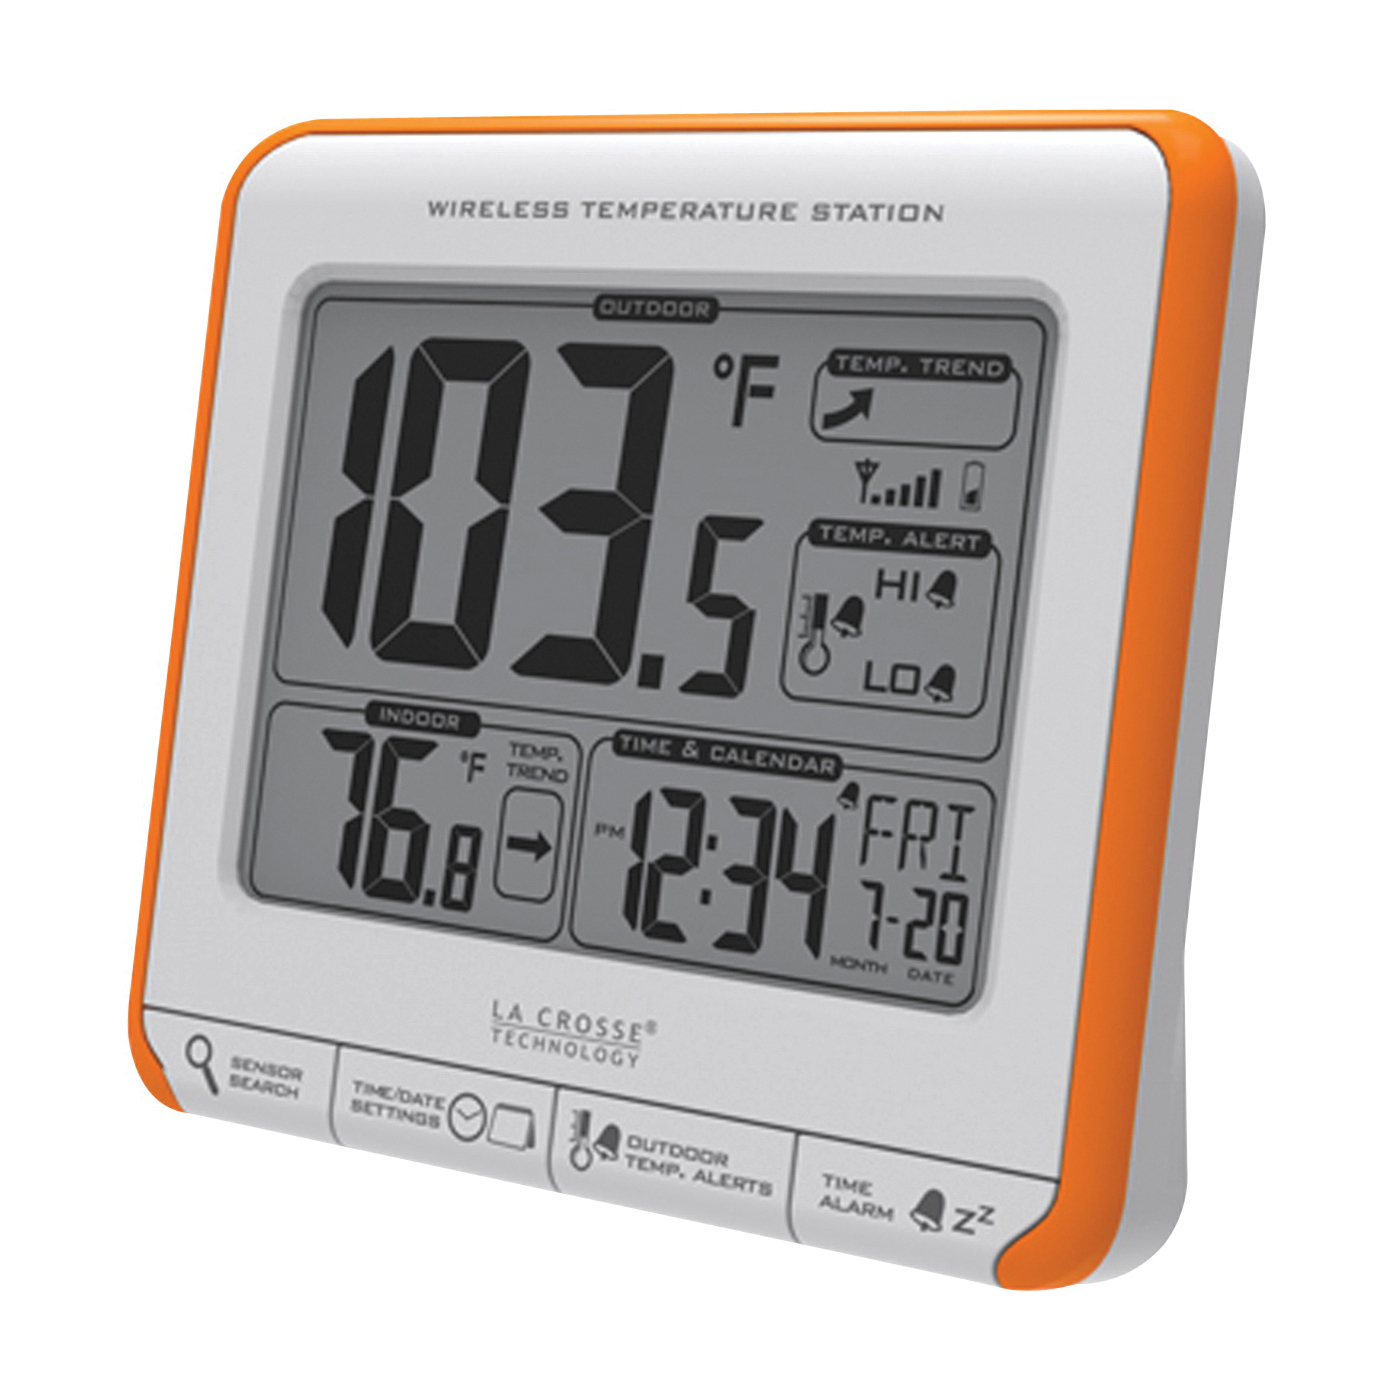 308-179OR Wireless Thermometer, 4.27 in L x 1.47 in W x 3.88 in H Display, 32 to 122 deg F